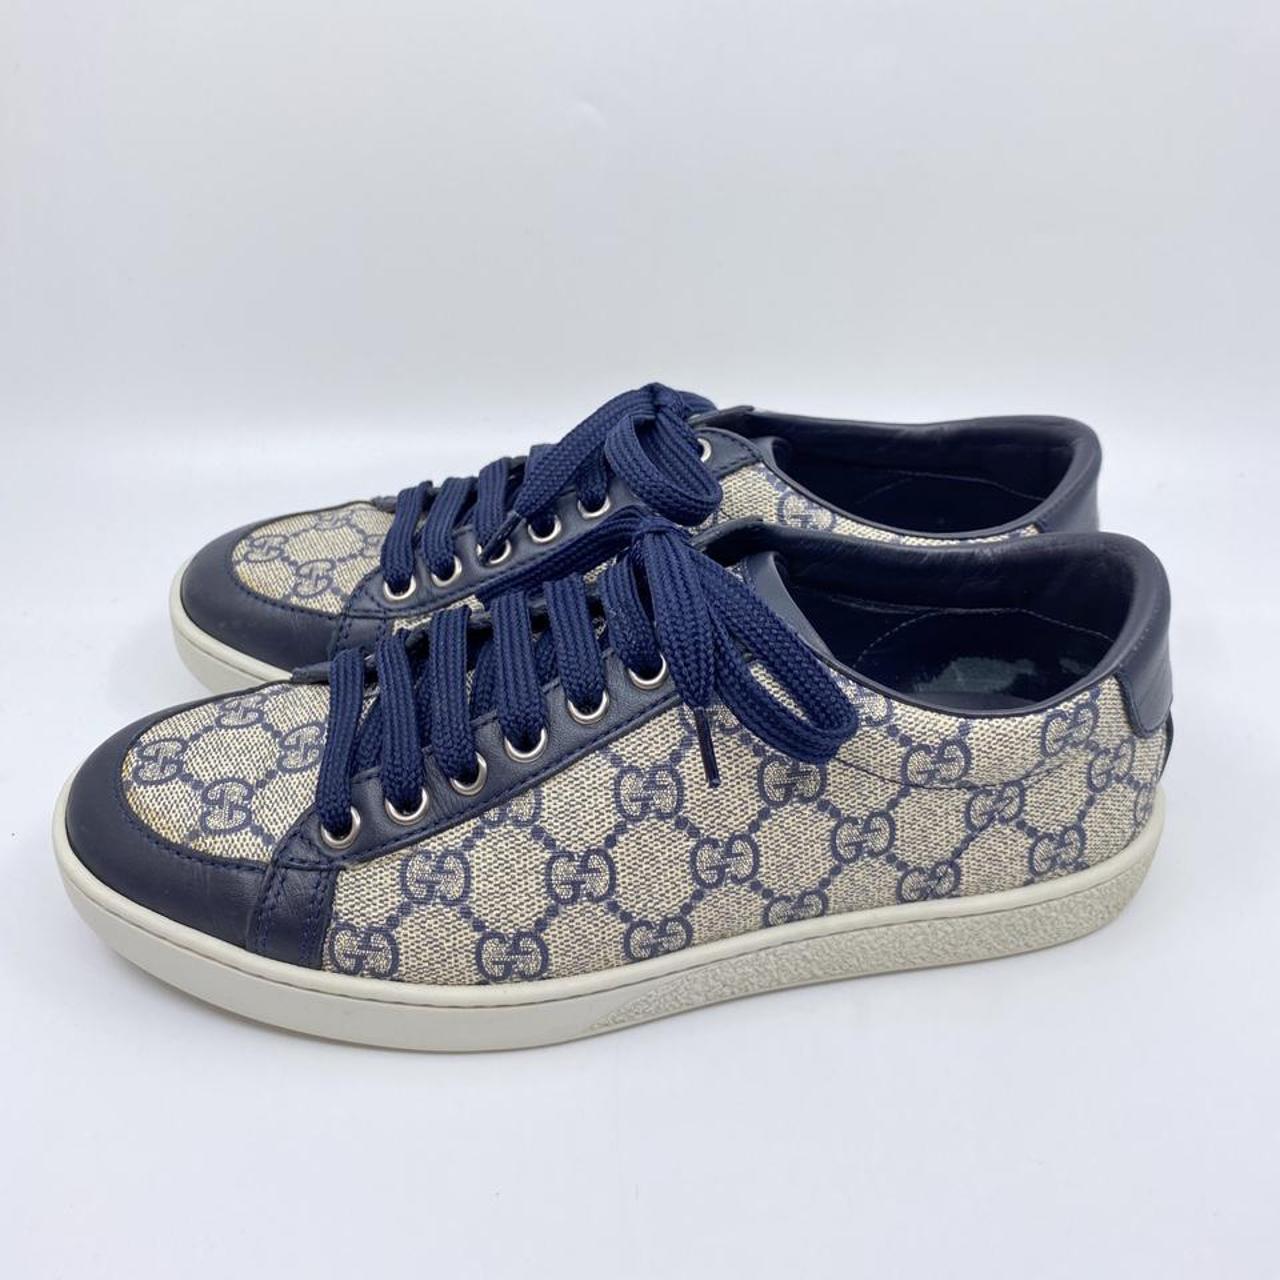 Gucci Women's Cream and Navy Trainers (4)